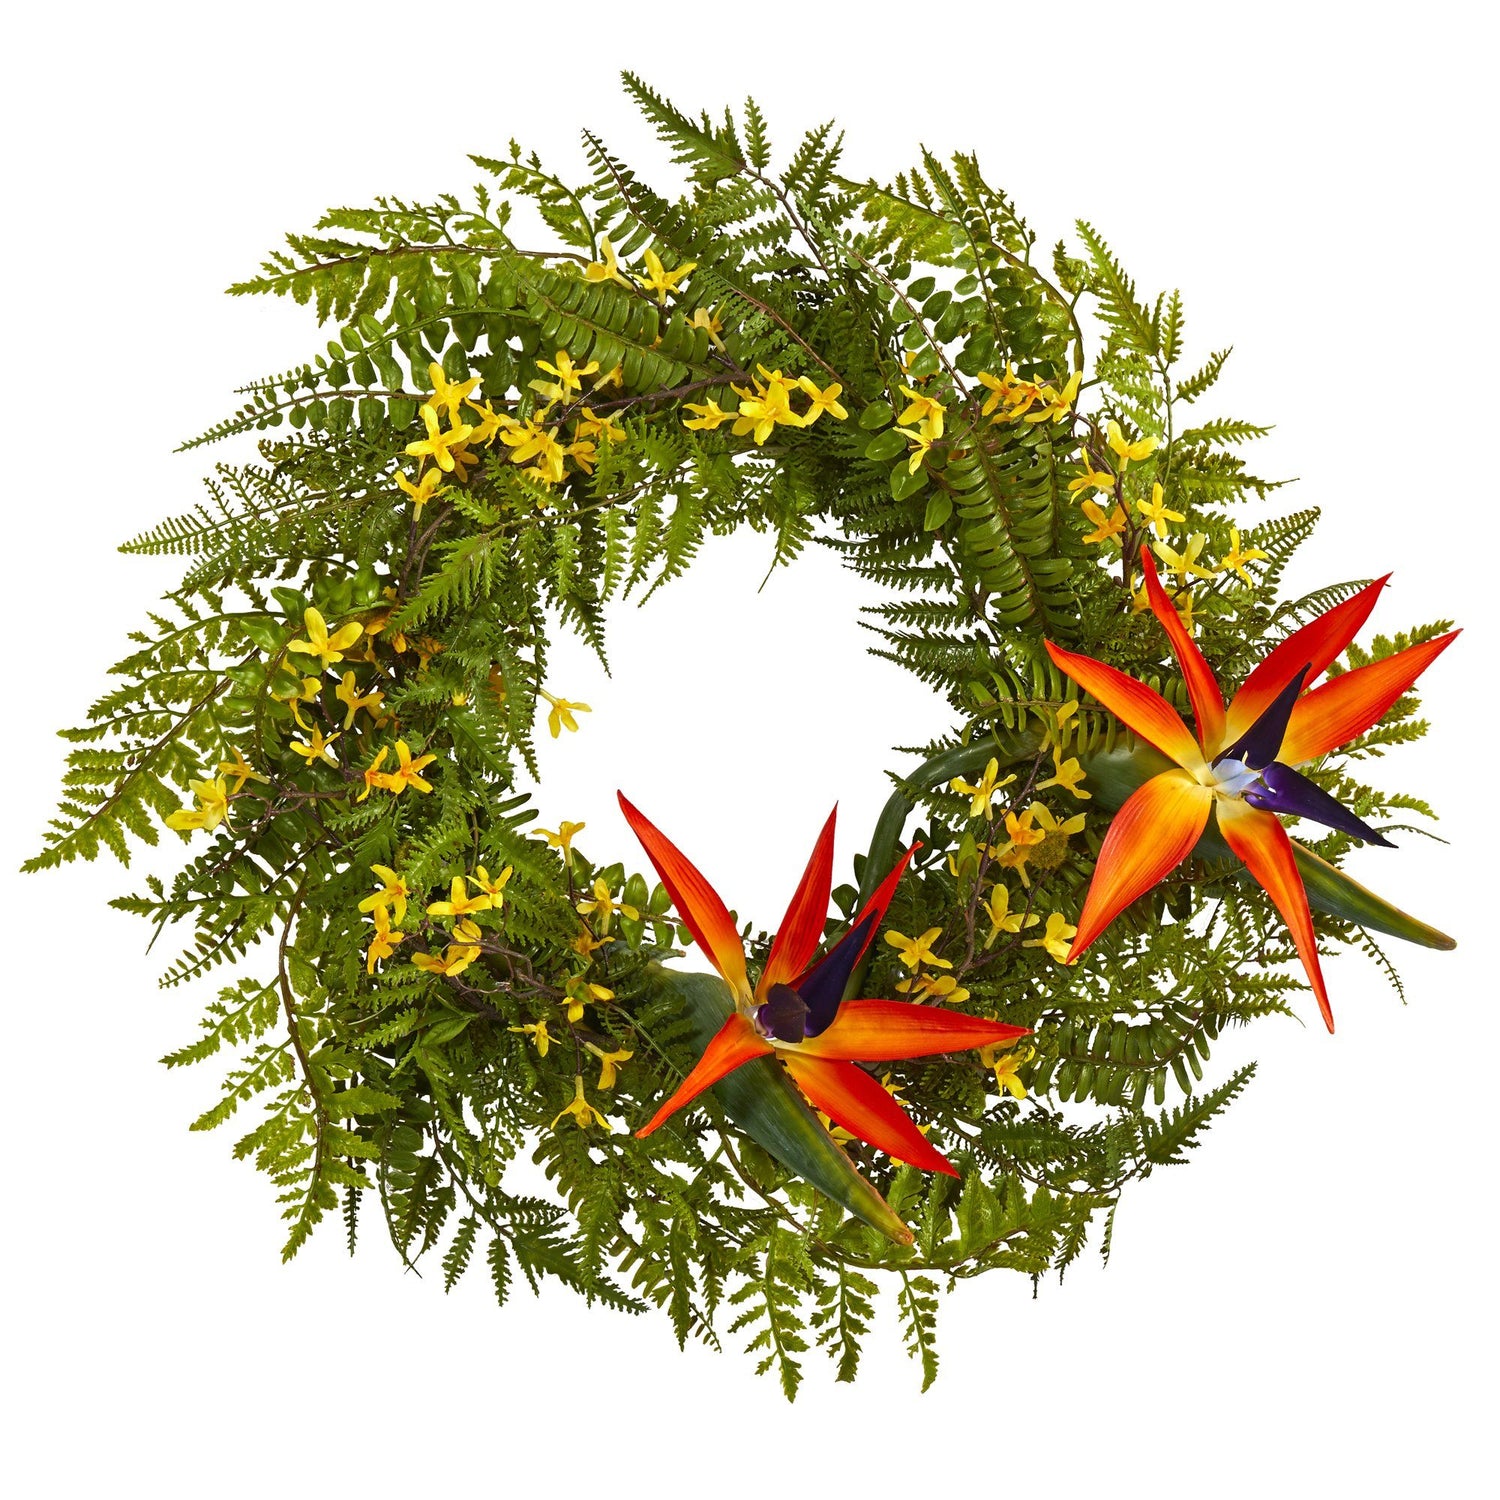 24” Mixed Fern, Forsythia and Bird of Paradise Artificial Wreath